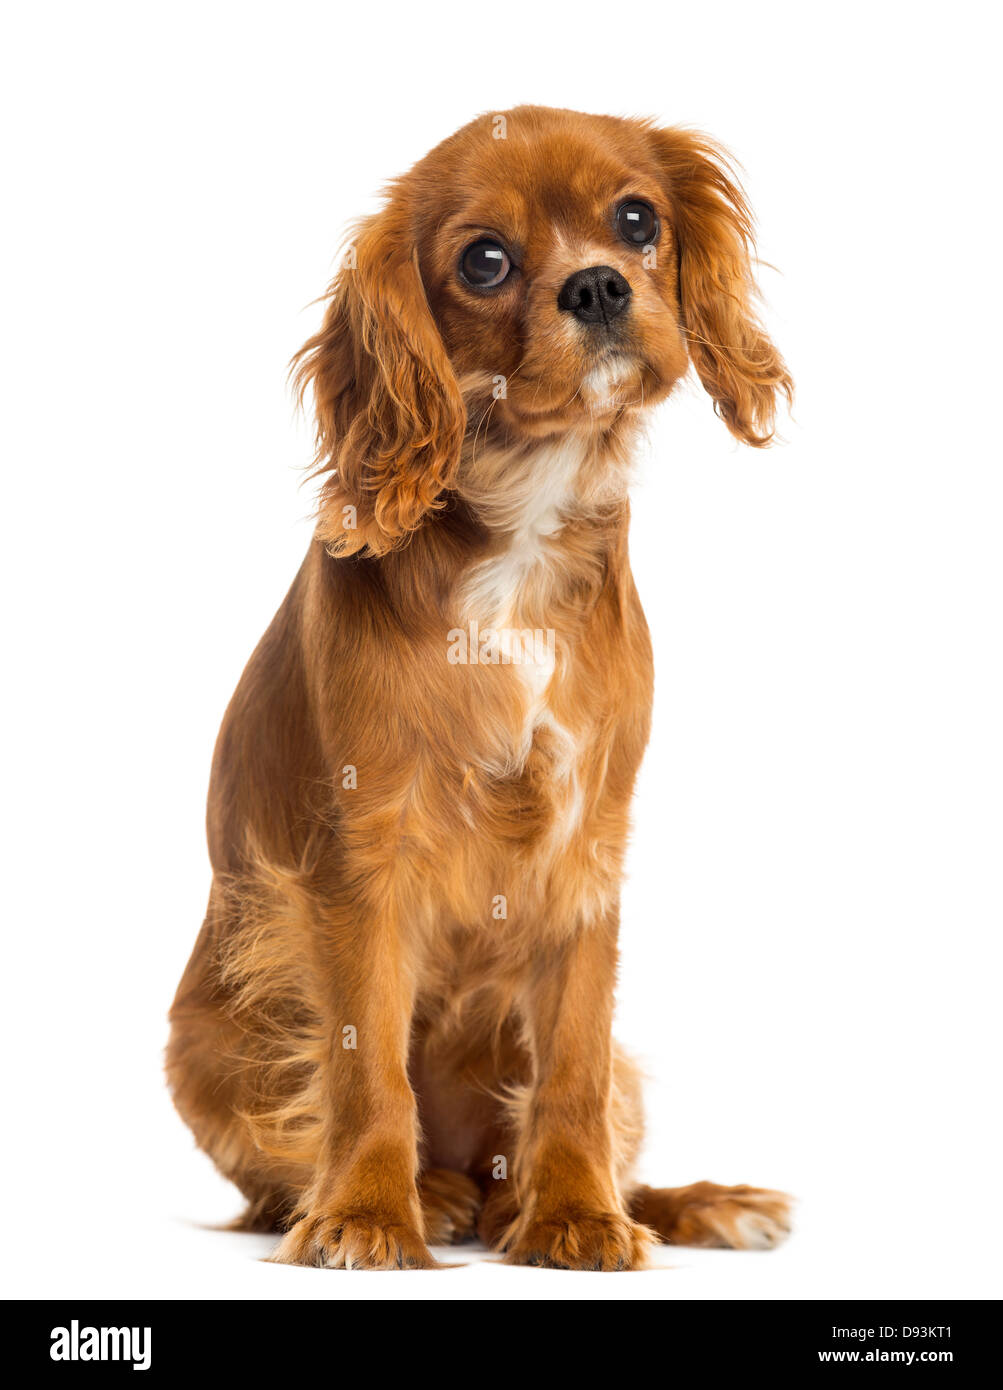 Cavalier King Charles Spaniel Puppy 5 Months Old Against White